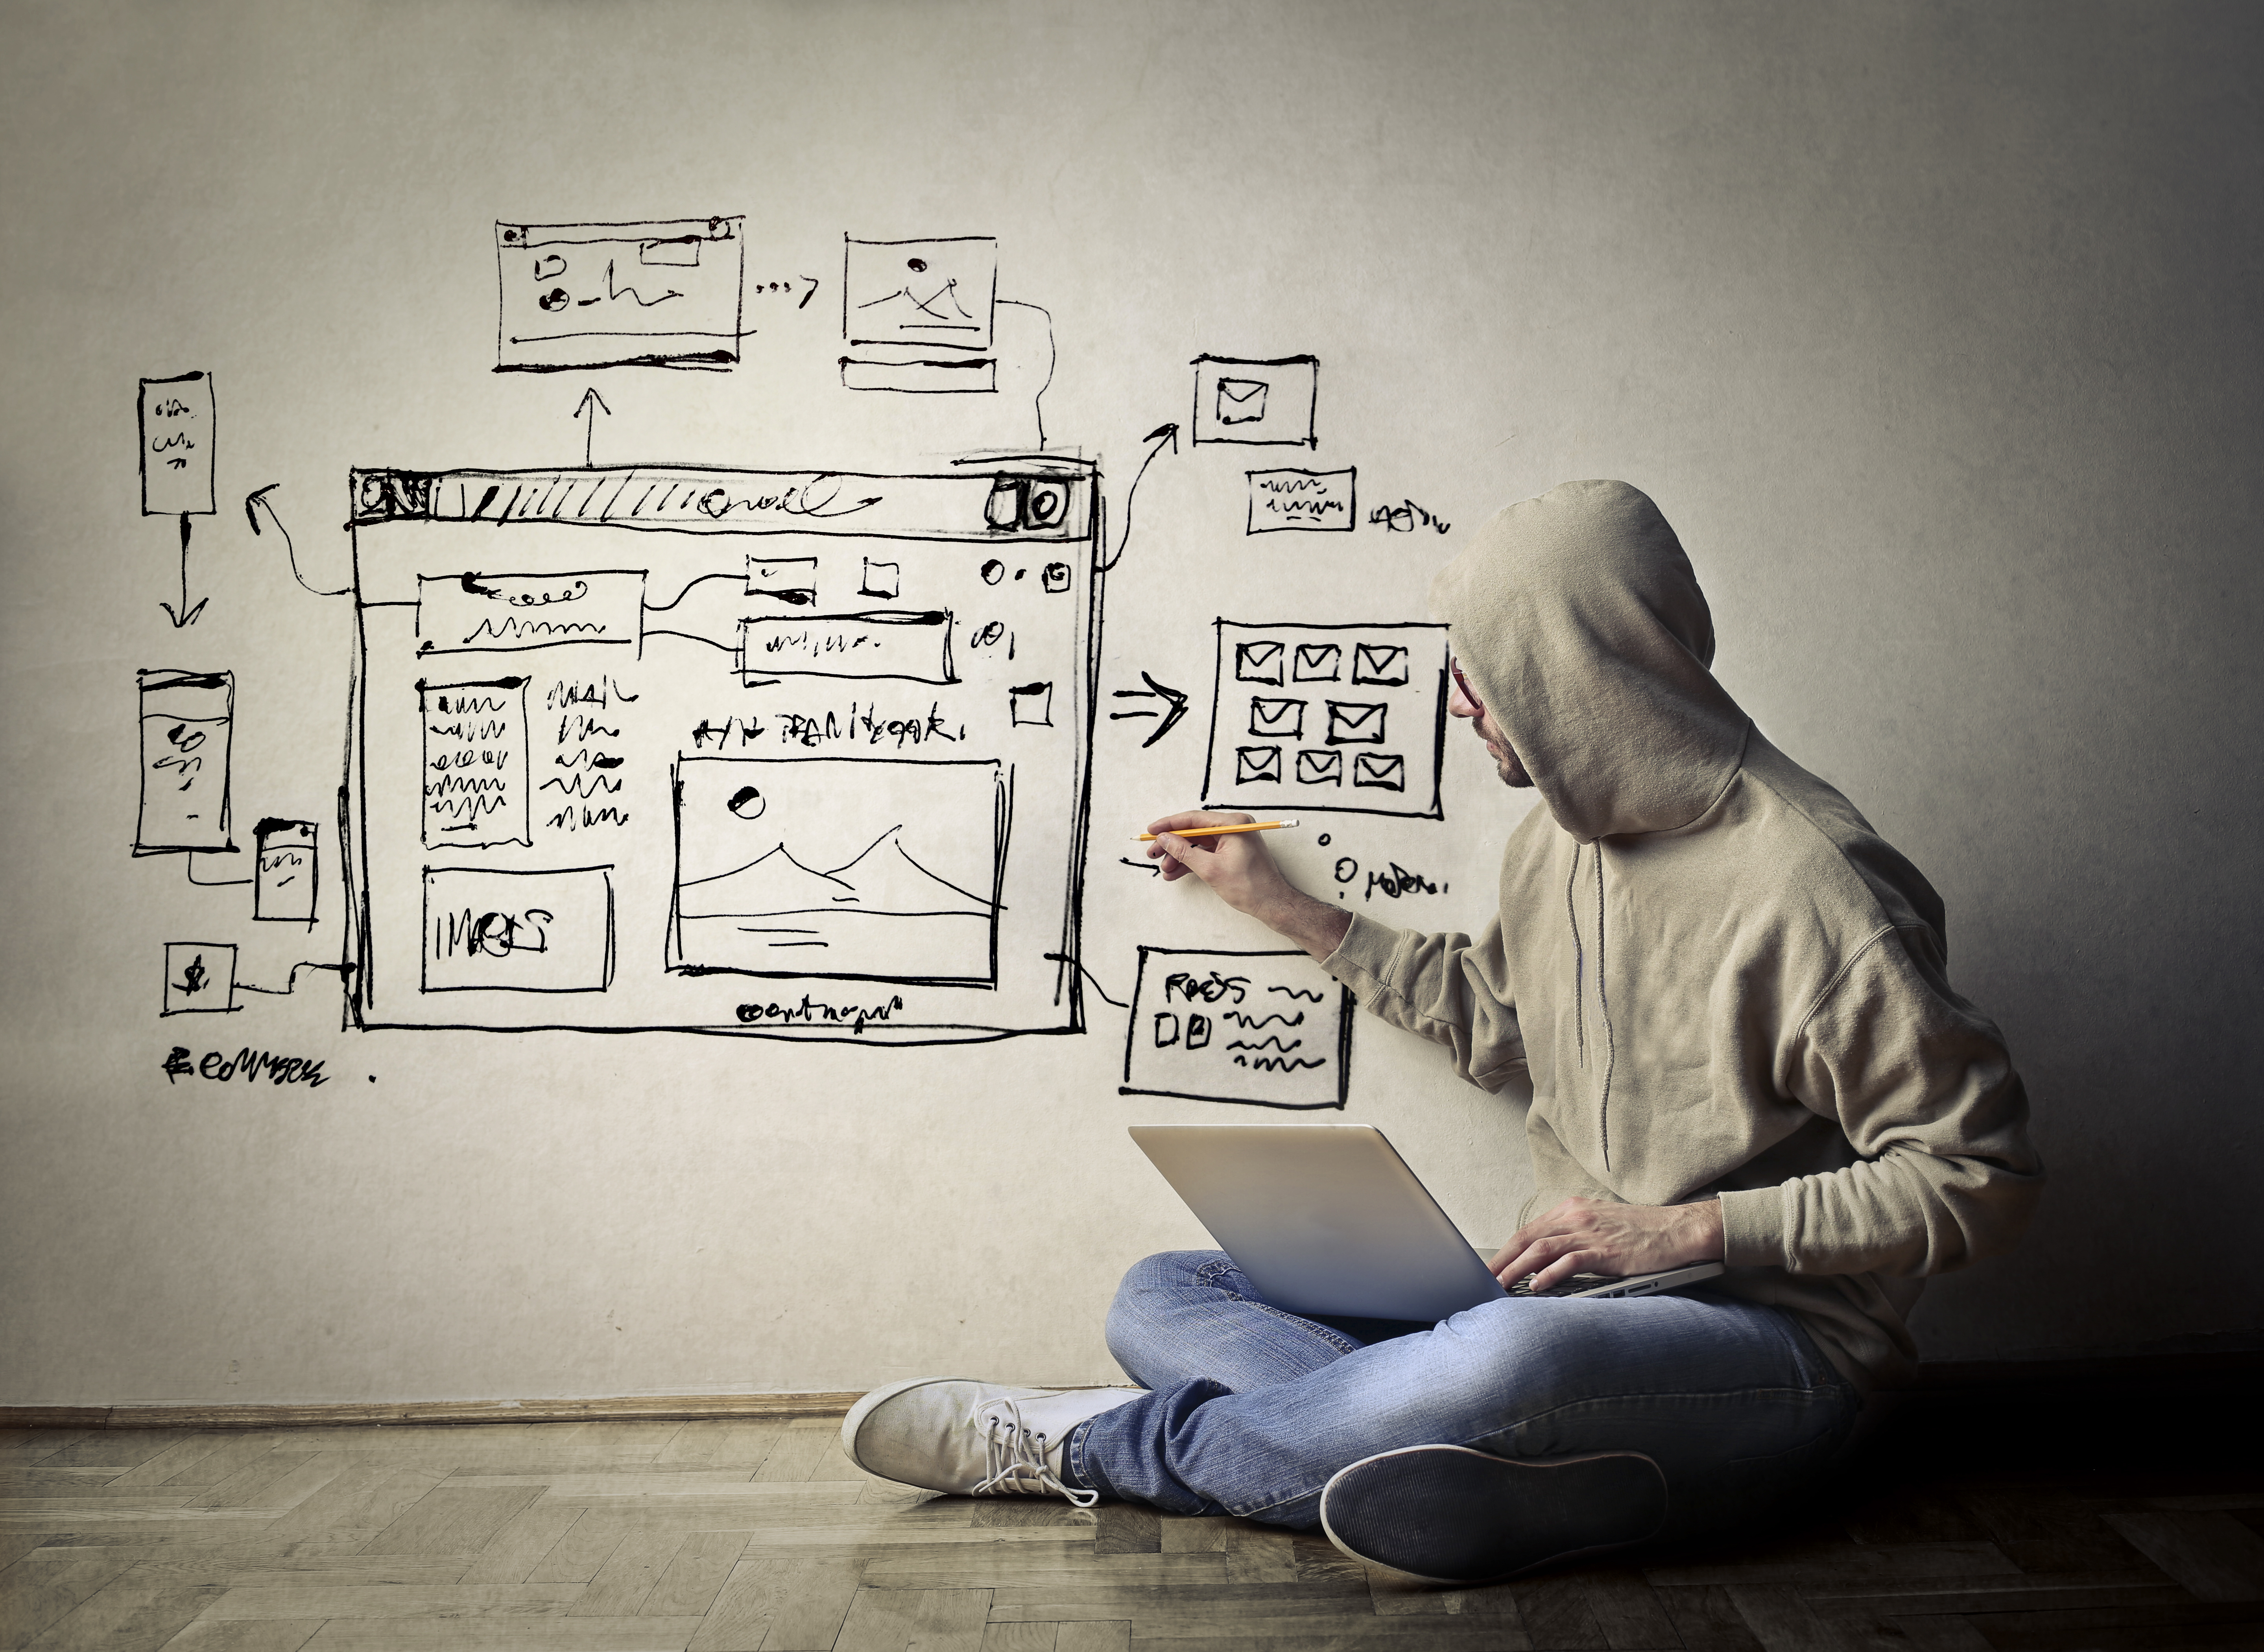 Image symbolising wireframing and online user experience for lead generation